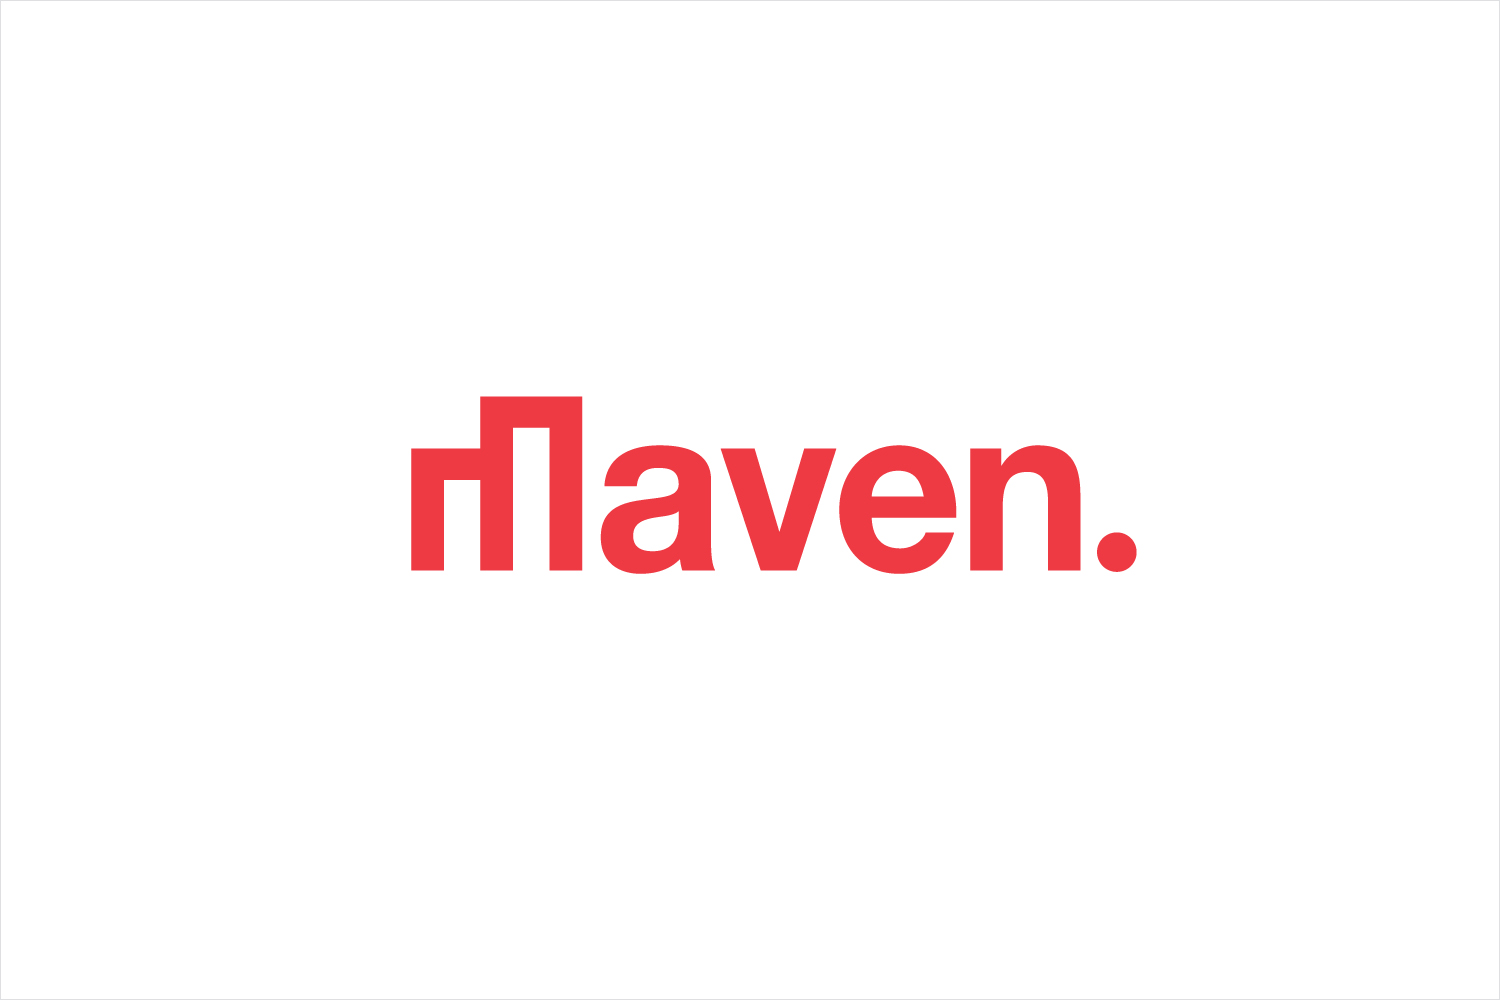 Logotype designed by Toko for architecture recruitment agency Maven